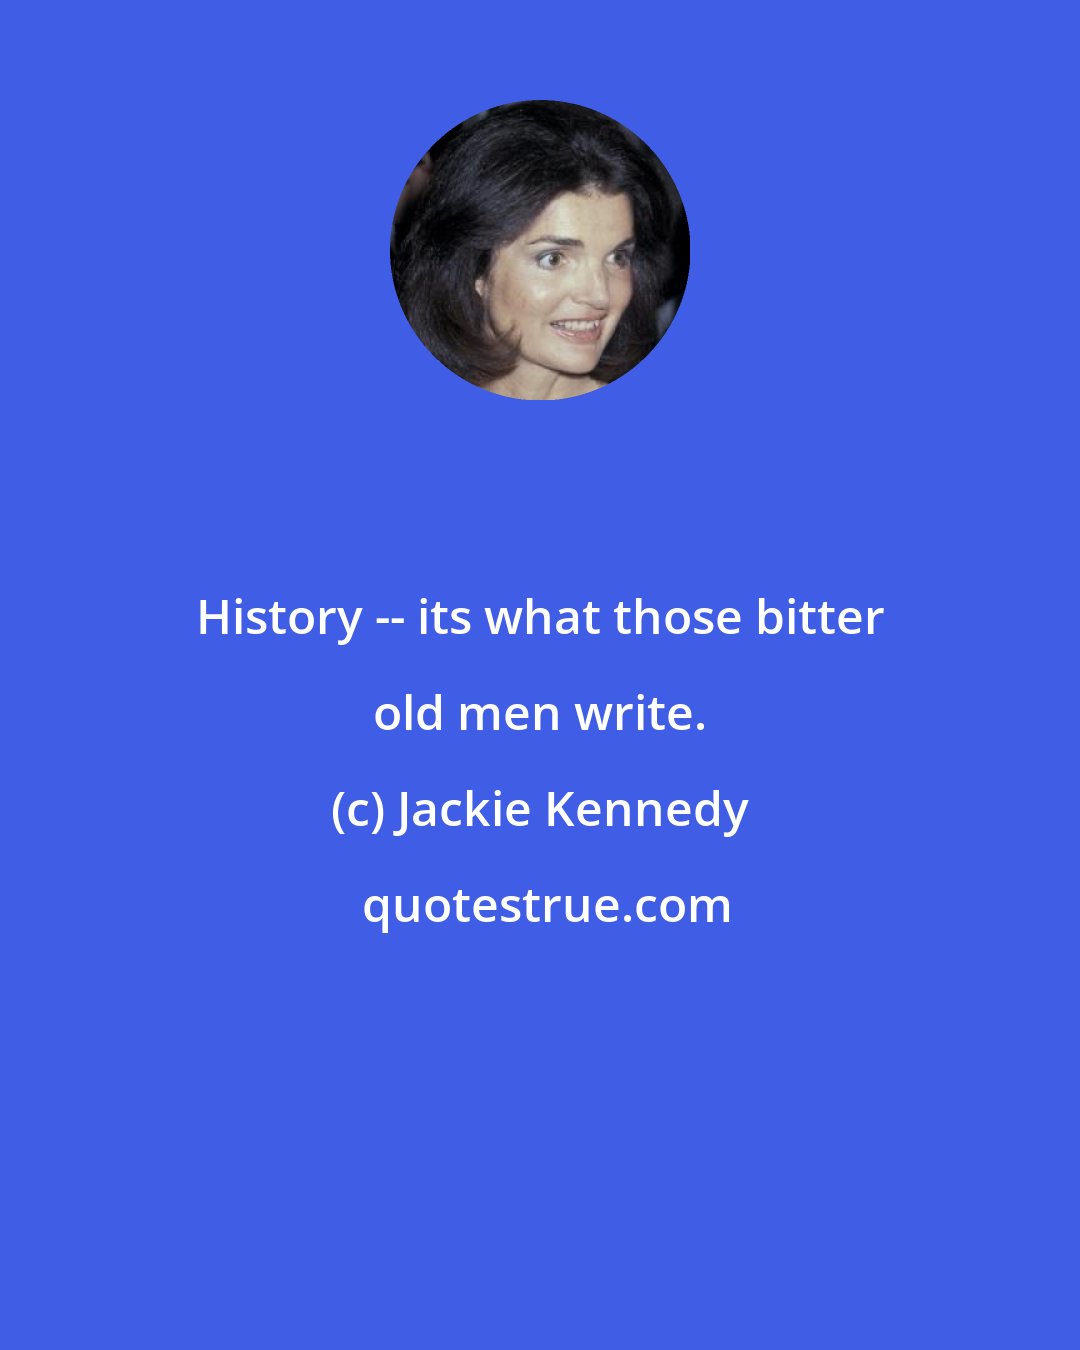 Jackie Kennedy: History -- its what those bitter old men write.